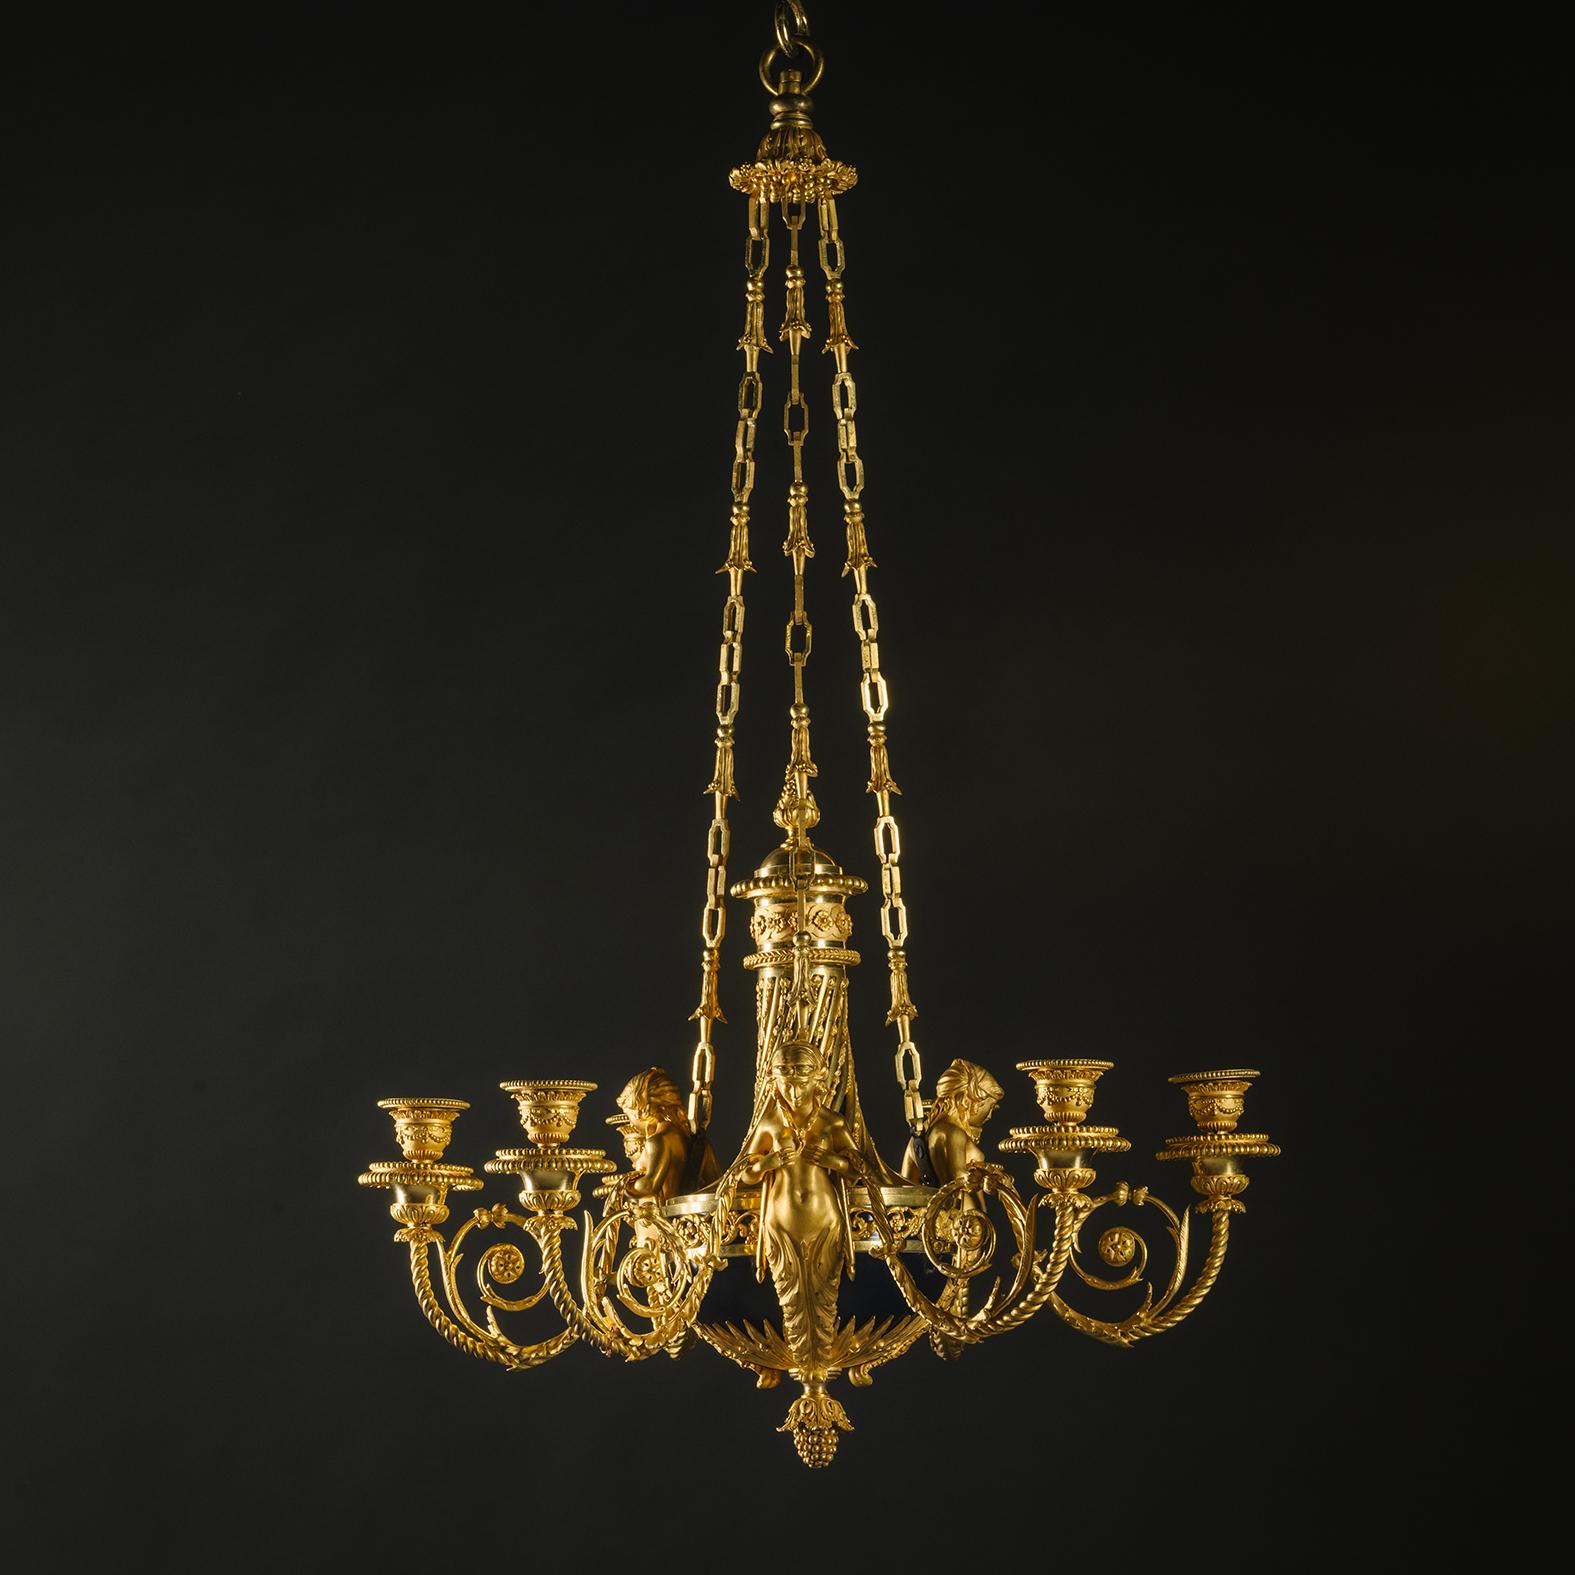 A Louis XVI Style Gilt-Bronze Six-Light Chandelier ‘aux Termes’
Attributed to Emmanuel-Alfred (dit Alfred II) Beurdeley, Paris.

Modelled with three caryatid term figures holding spiral branches issuing candle nozzles. The whole executed in